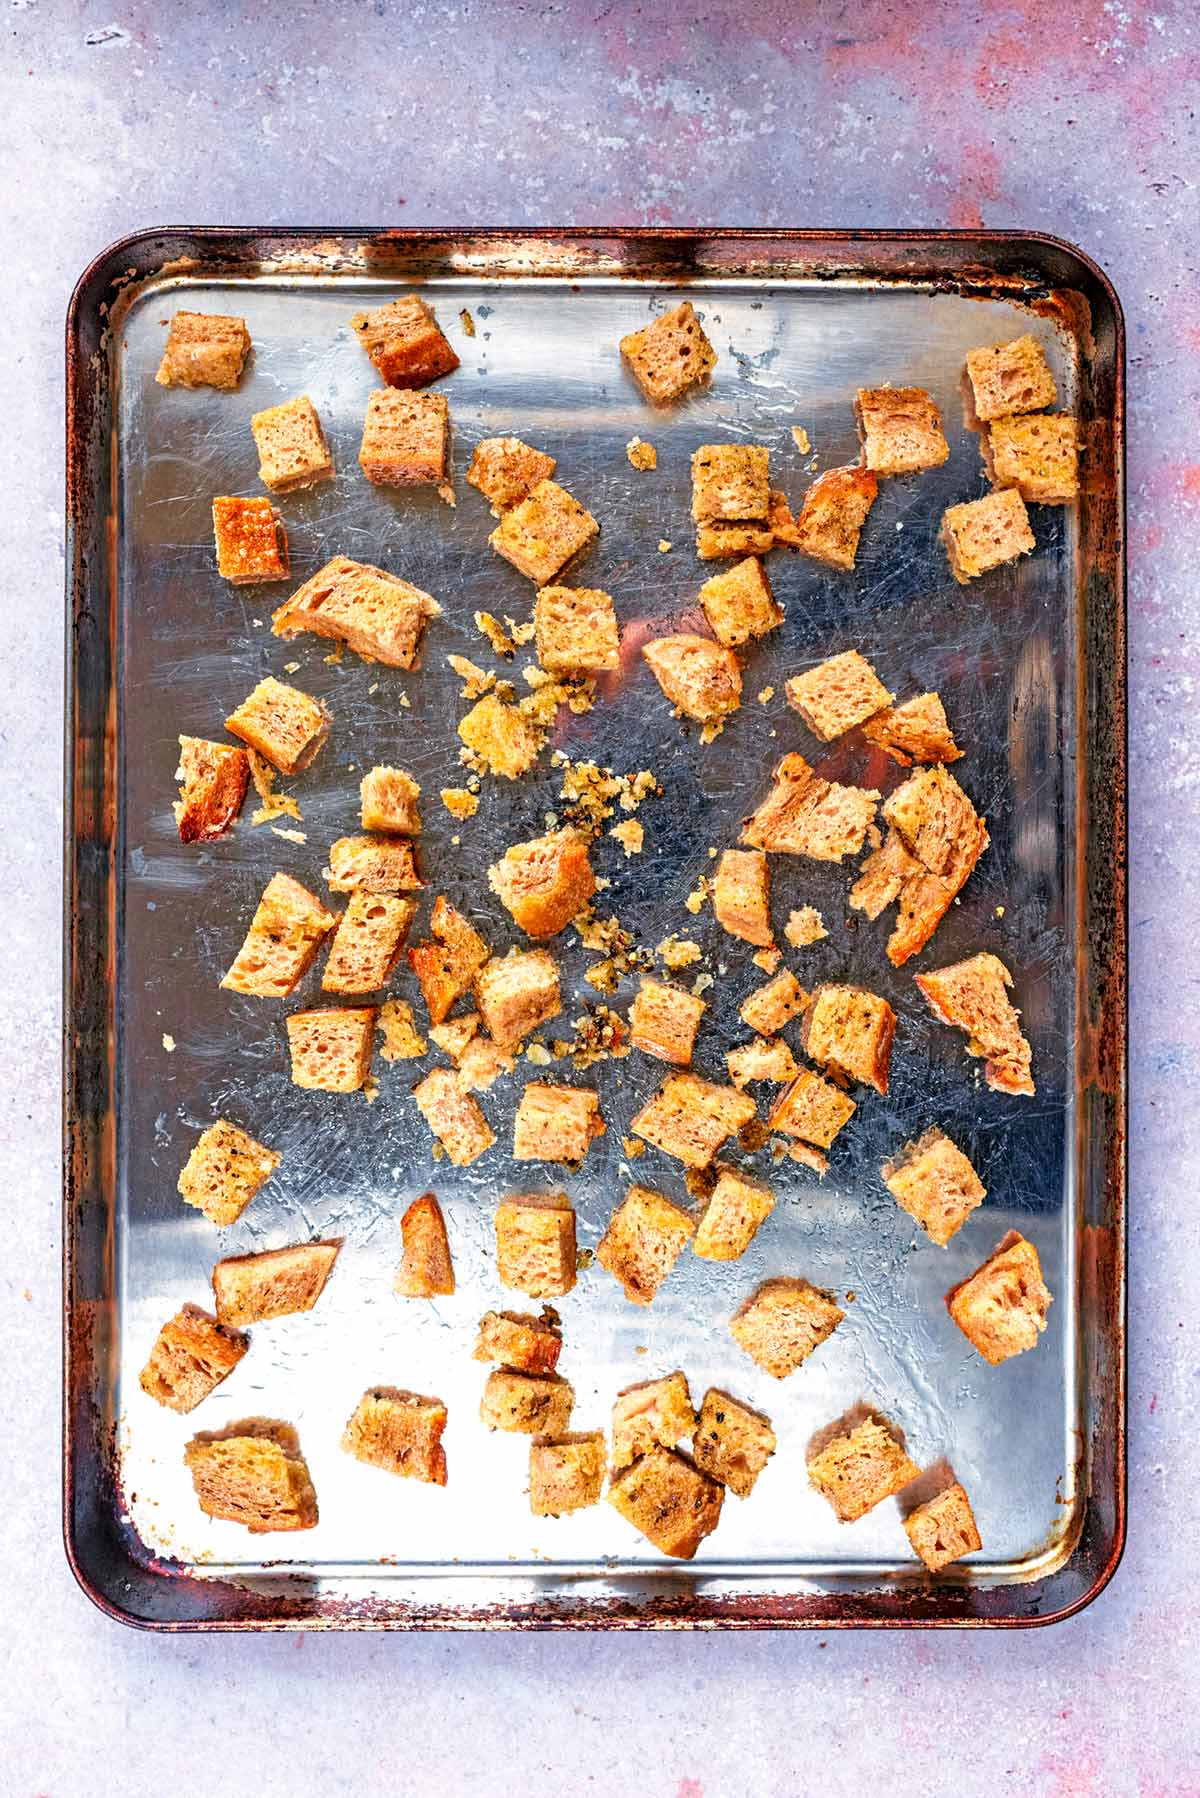 The bread cubes spread out over a baking tray.